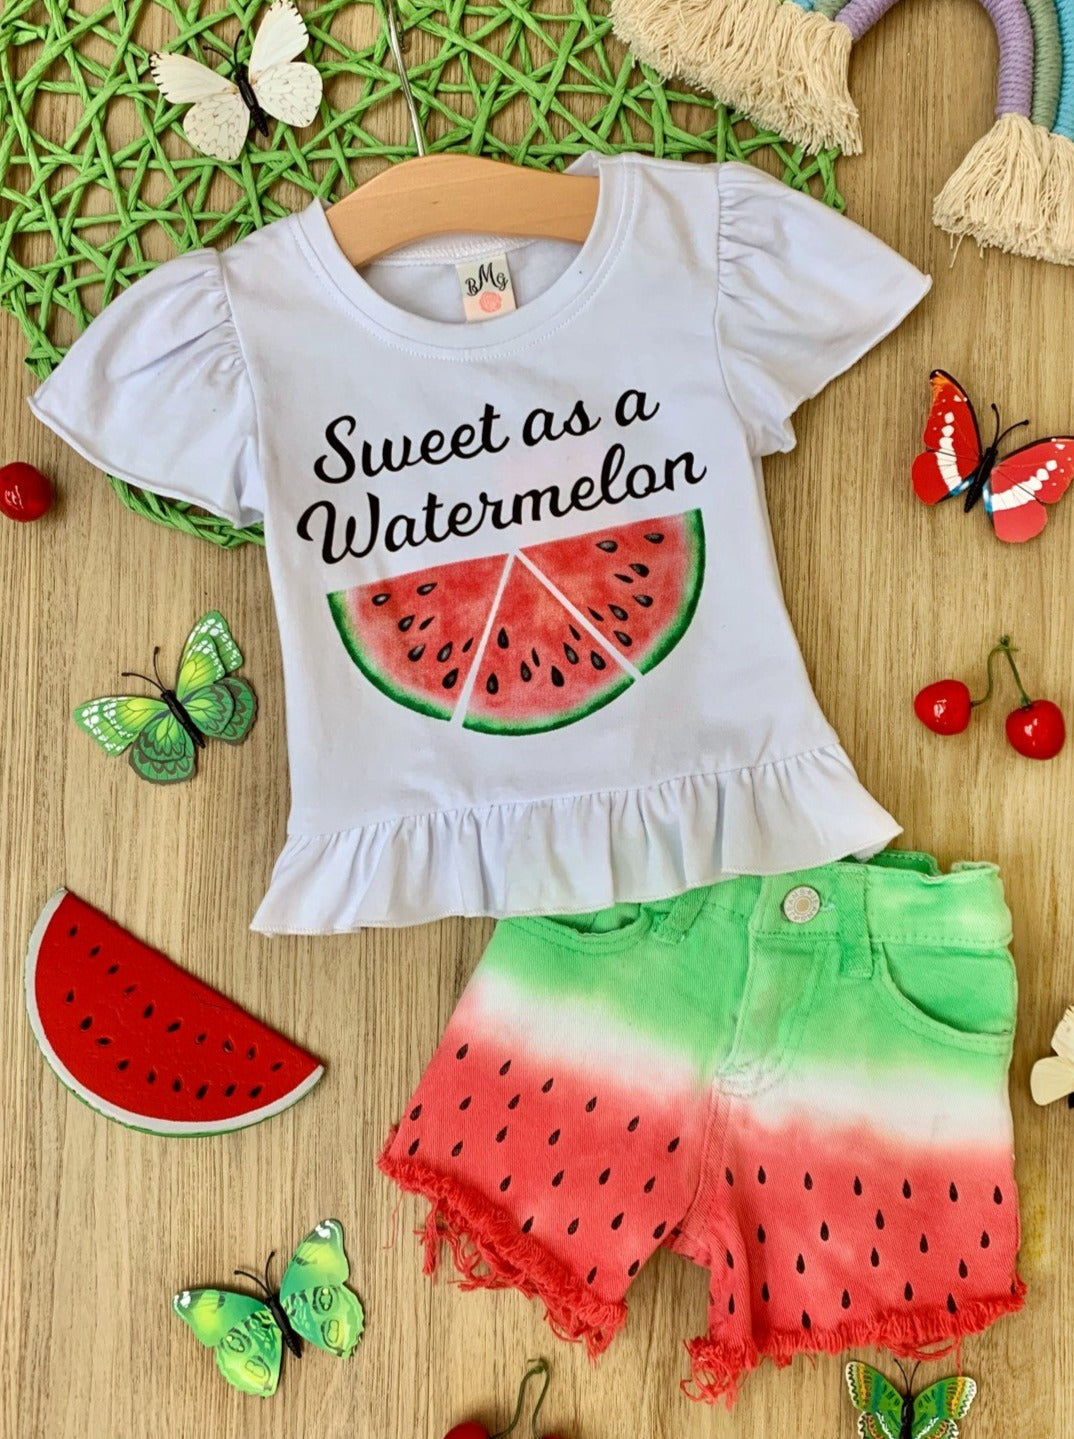 Girls set features a white ruffled top with "Sweet as a Watermelon" and tie-dye watermelon denim shorts